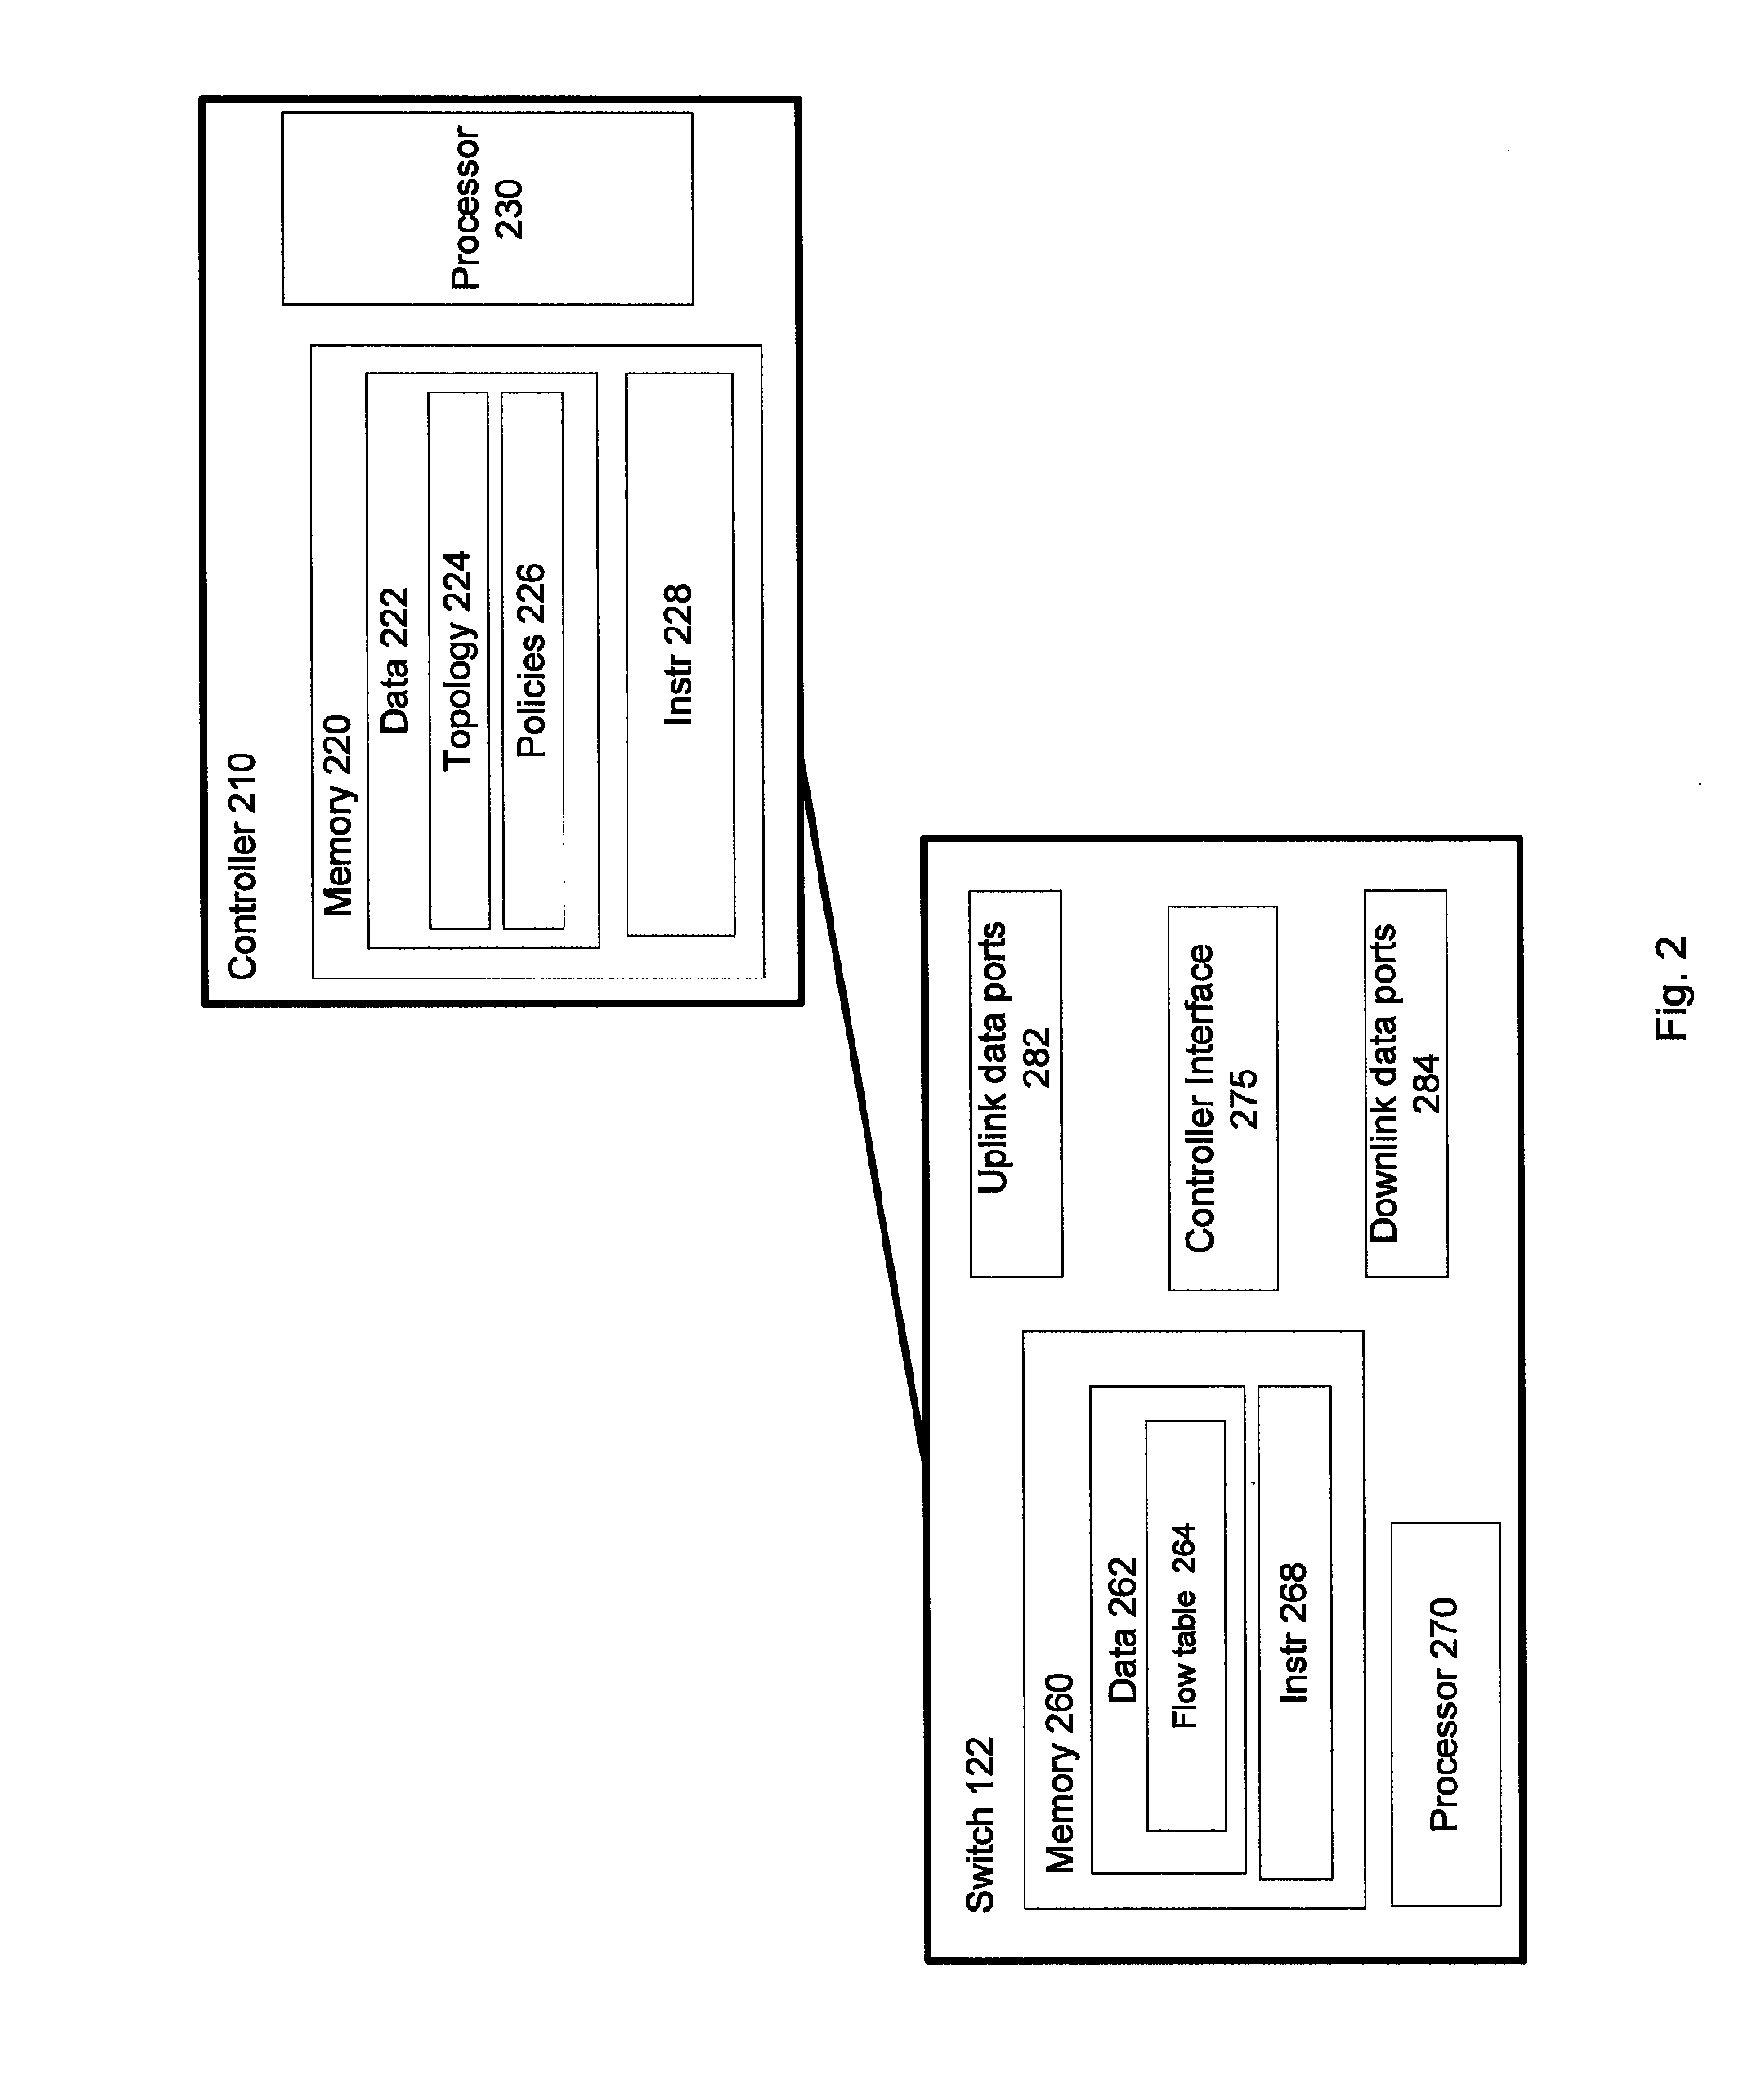 System and method for routing around failed links